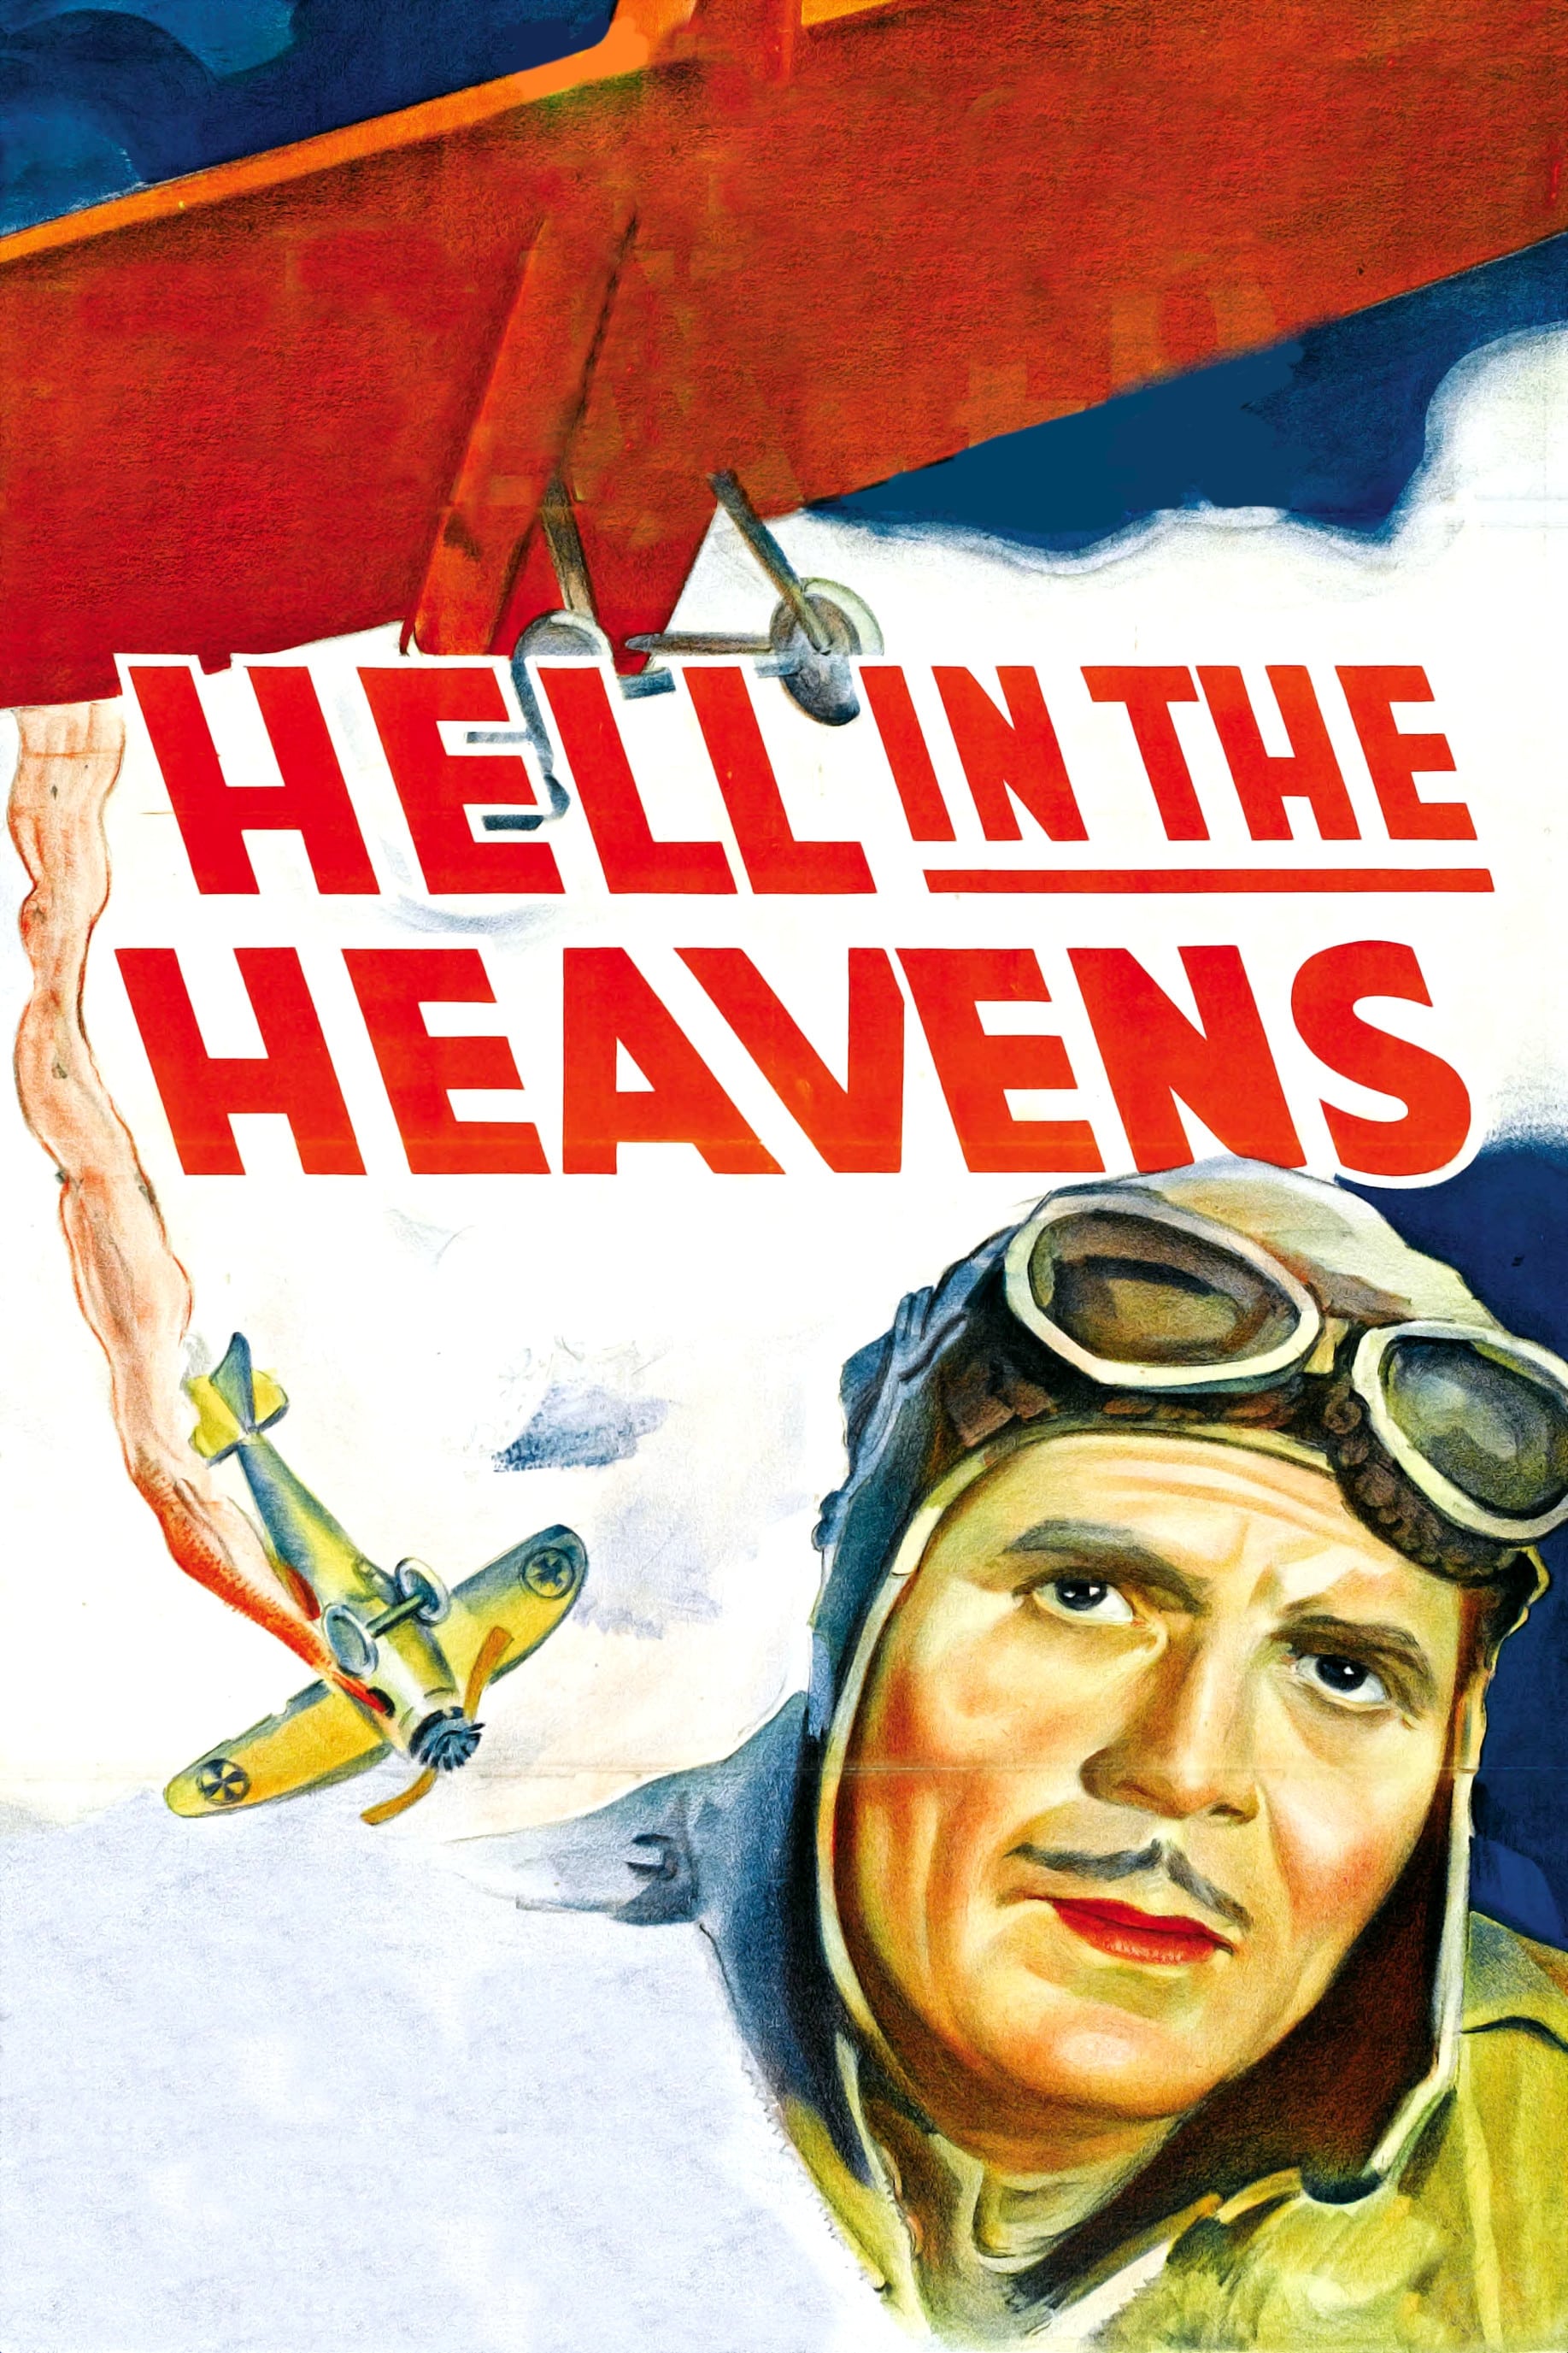 Hell in the Heavens (1934)